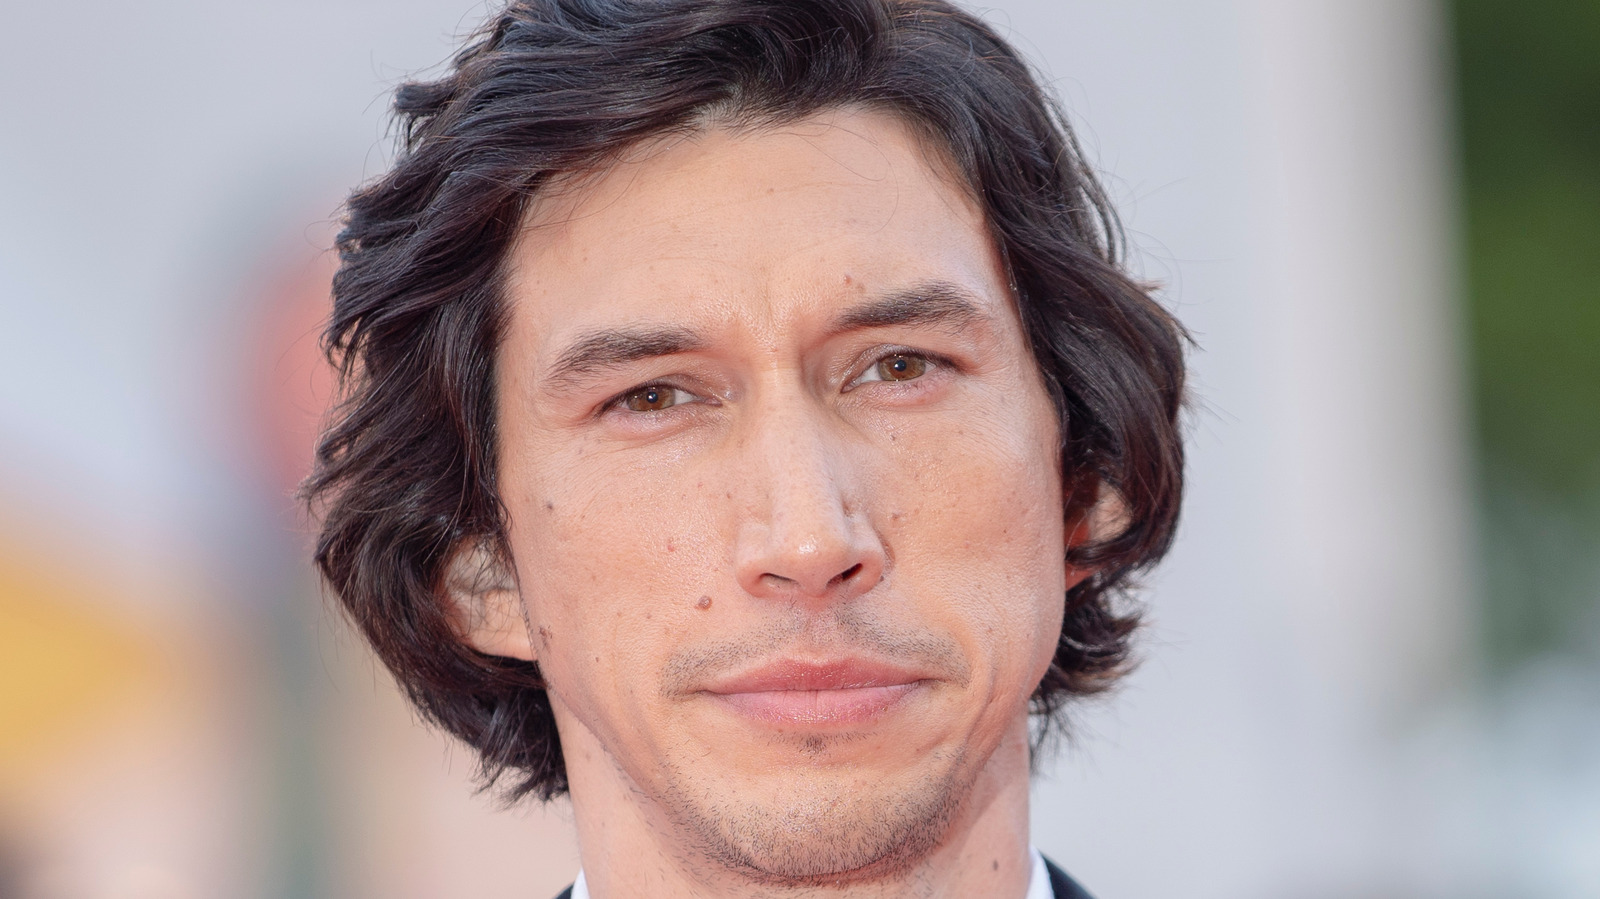 The New Adam Driver Burberry Commercial Has The Internet In Stitches